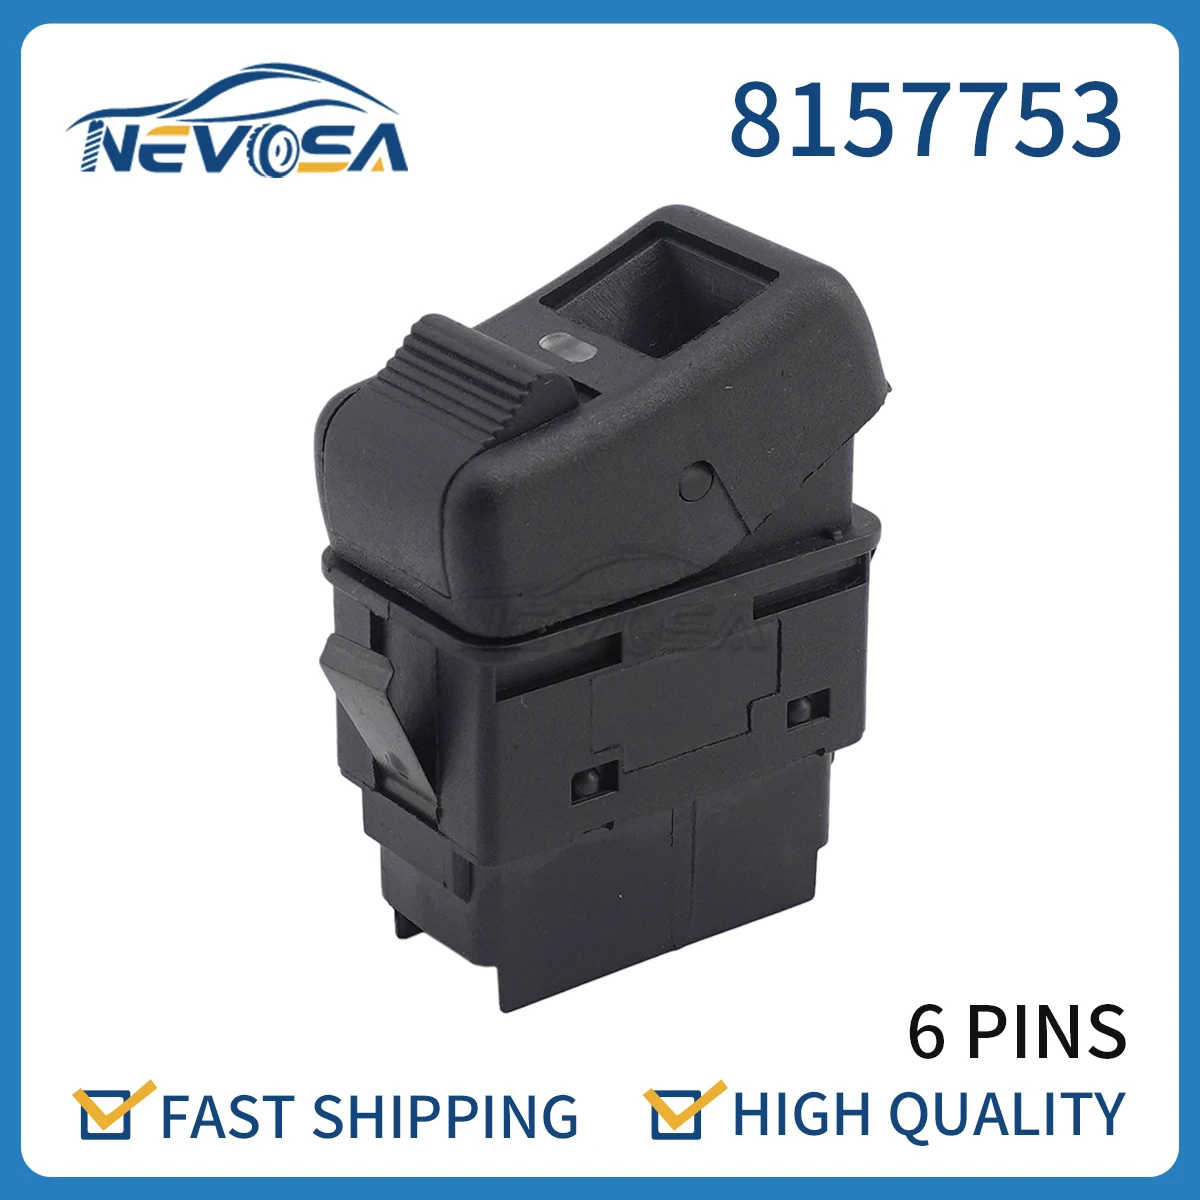 

Nevosa 8157753 1624112 Differential Lock Switch Button For Volvo FH 12 16 FM 10 FL NH Truck Automatic Flip Switch Control